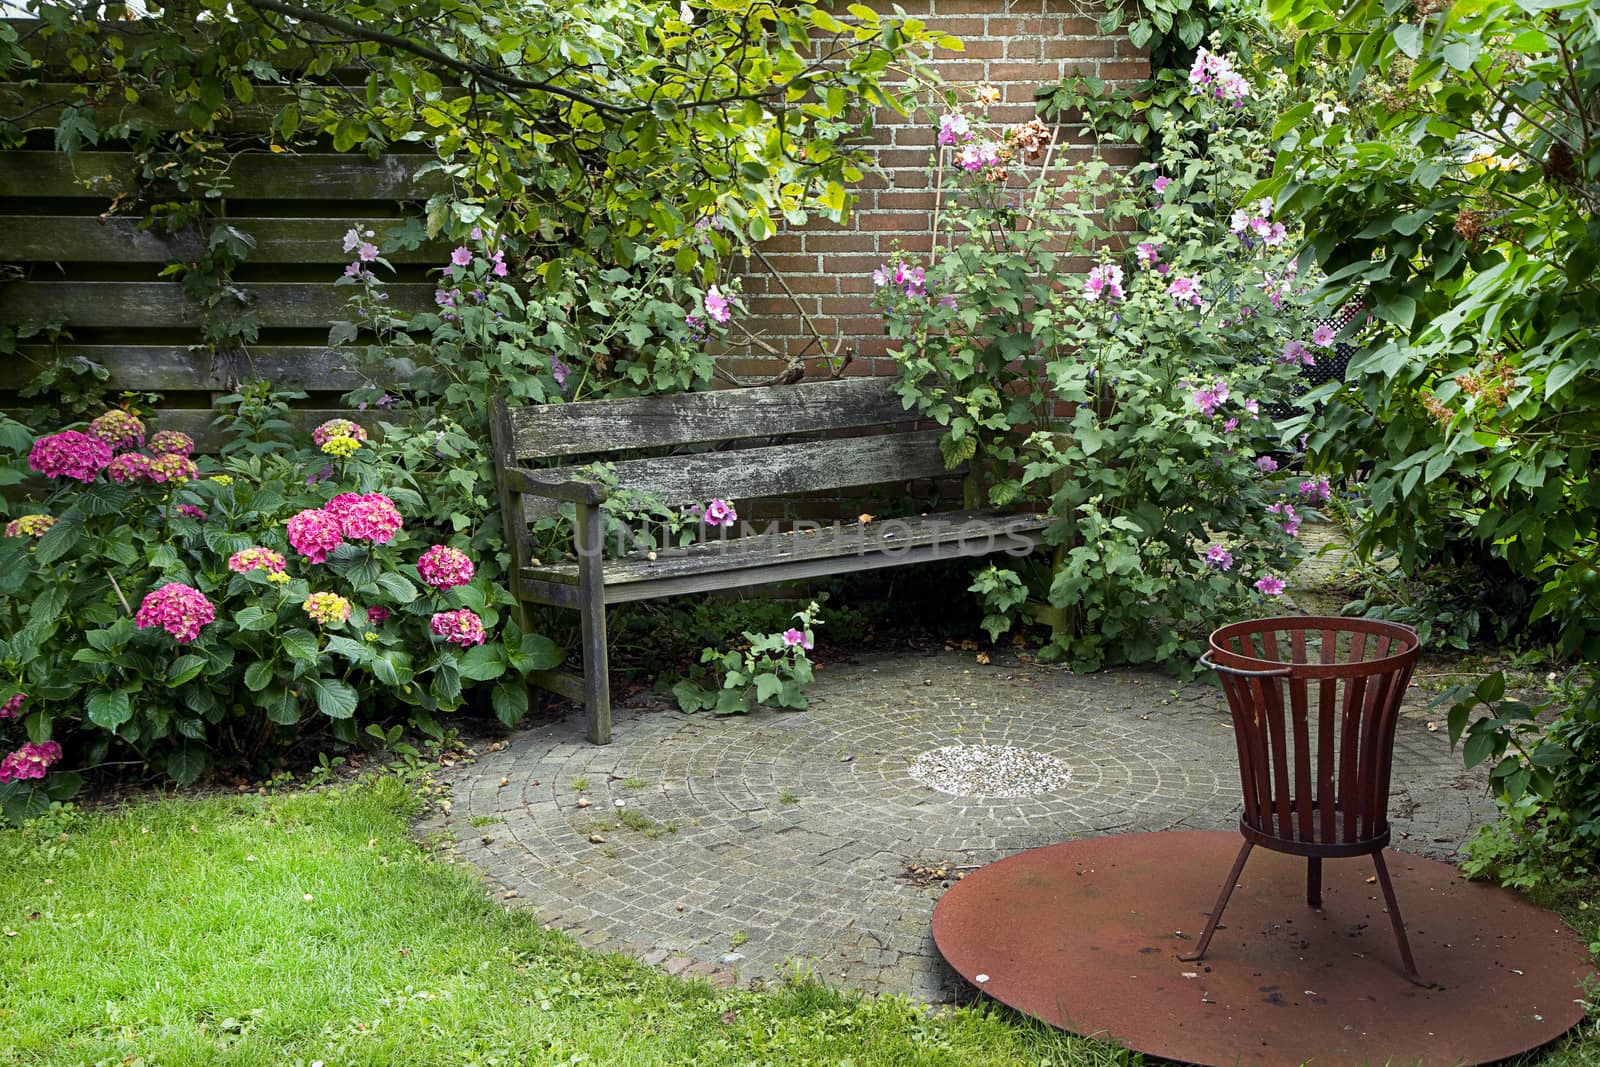 Country-style garden with bench, fireplace and lots of flowers in summer